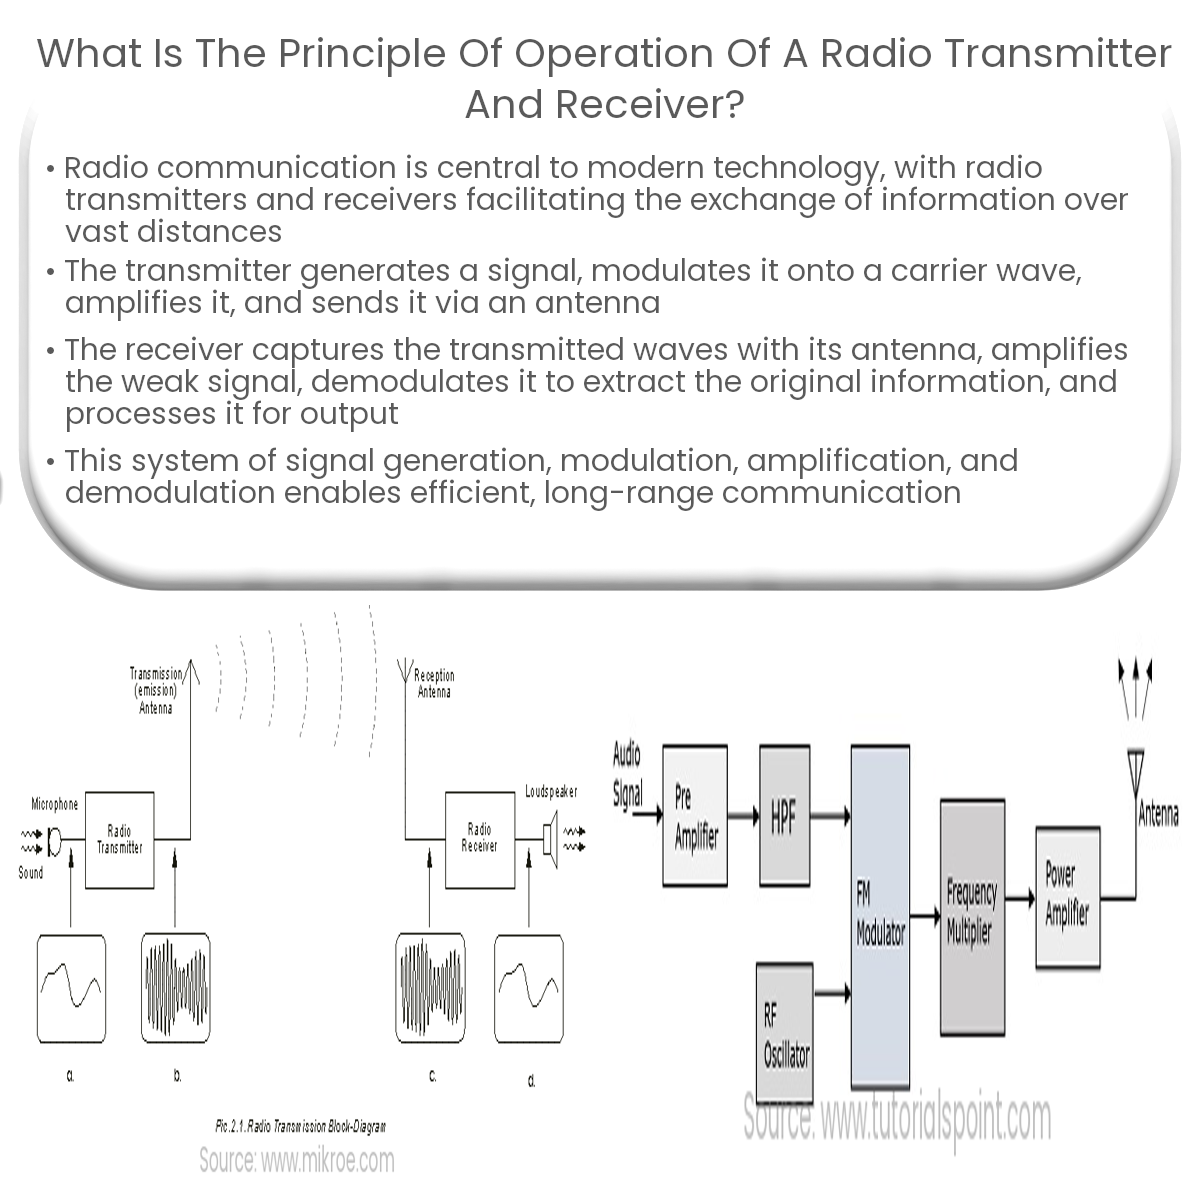 What is the principle of operation of a radio transmitter and receiver?